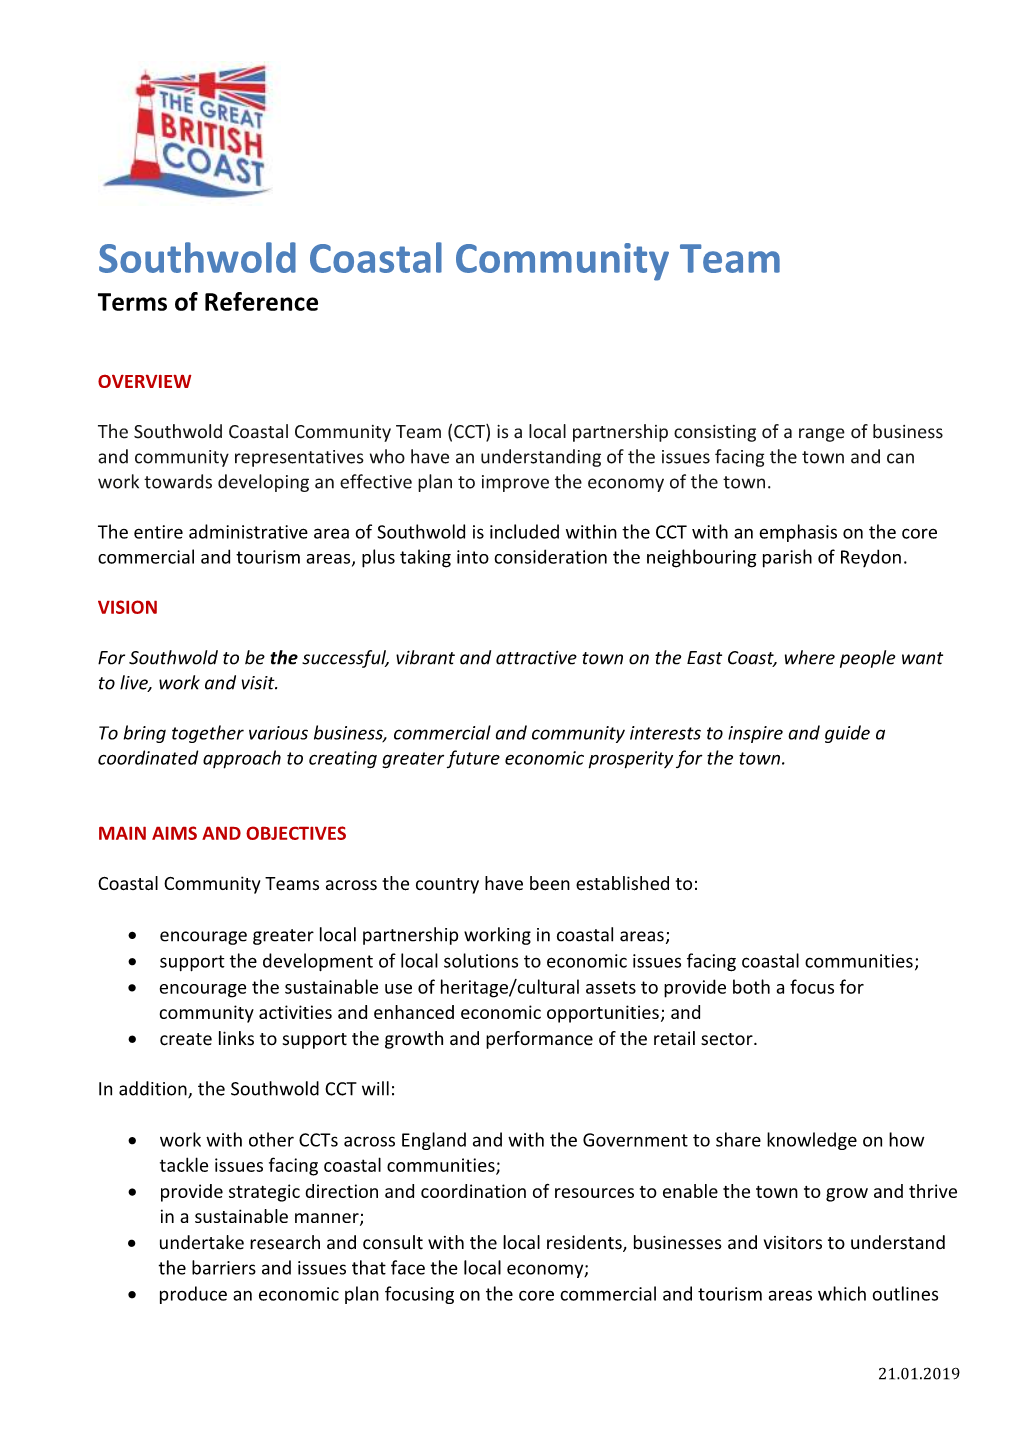 Southwold Coastal Community Team Terms of Reference